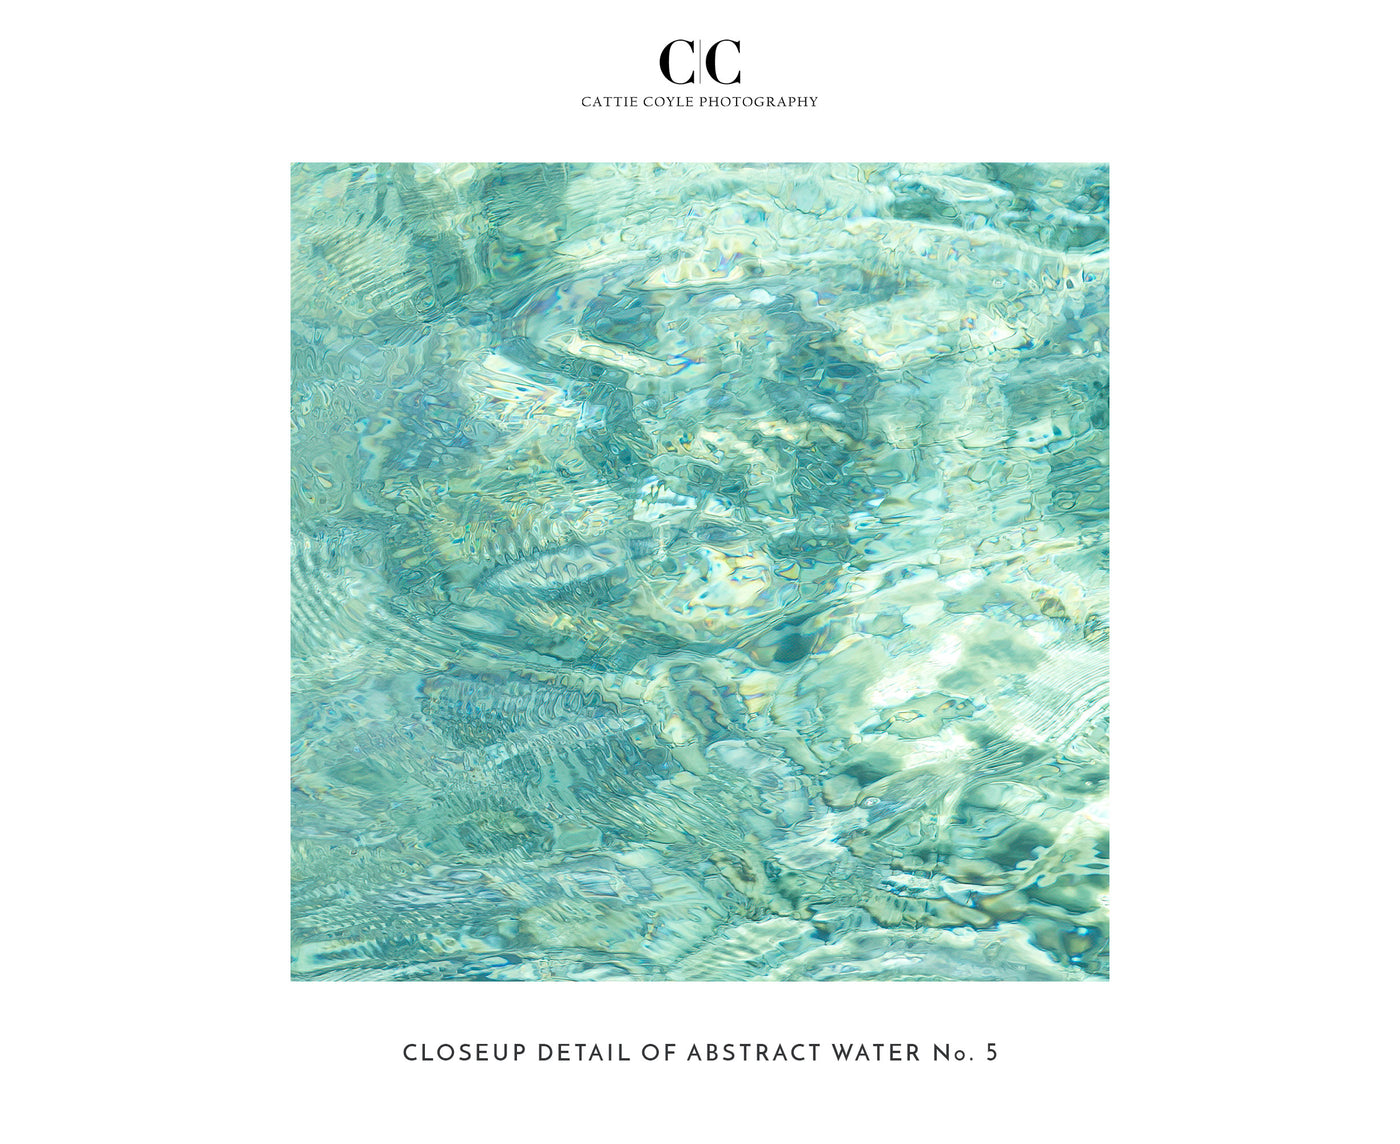 Abstract Water – Closeup detail of ocean art print by Cattie Coyle Photography